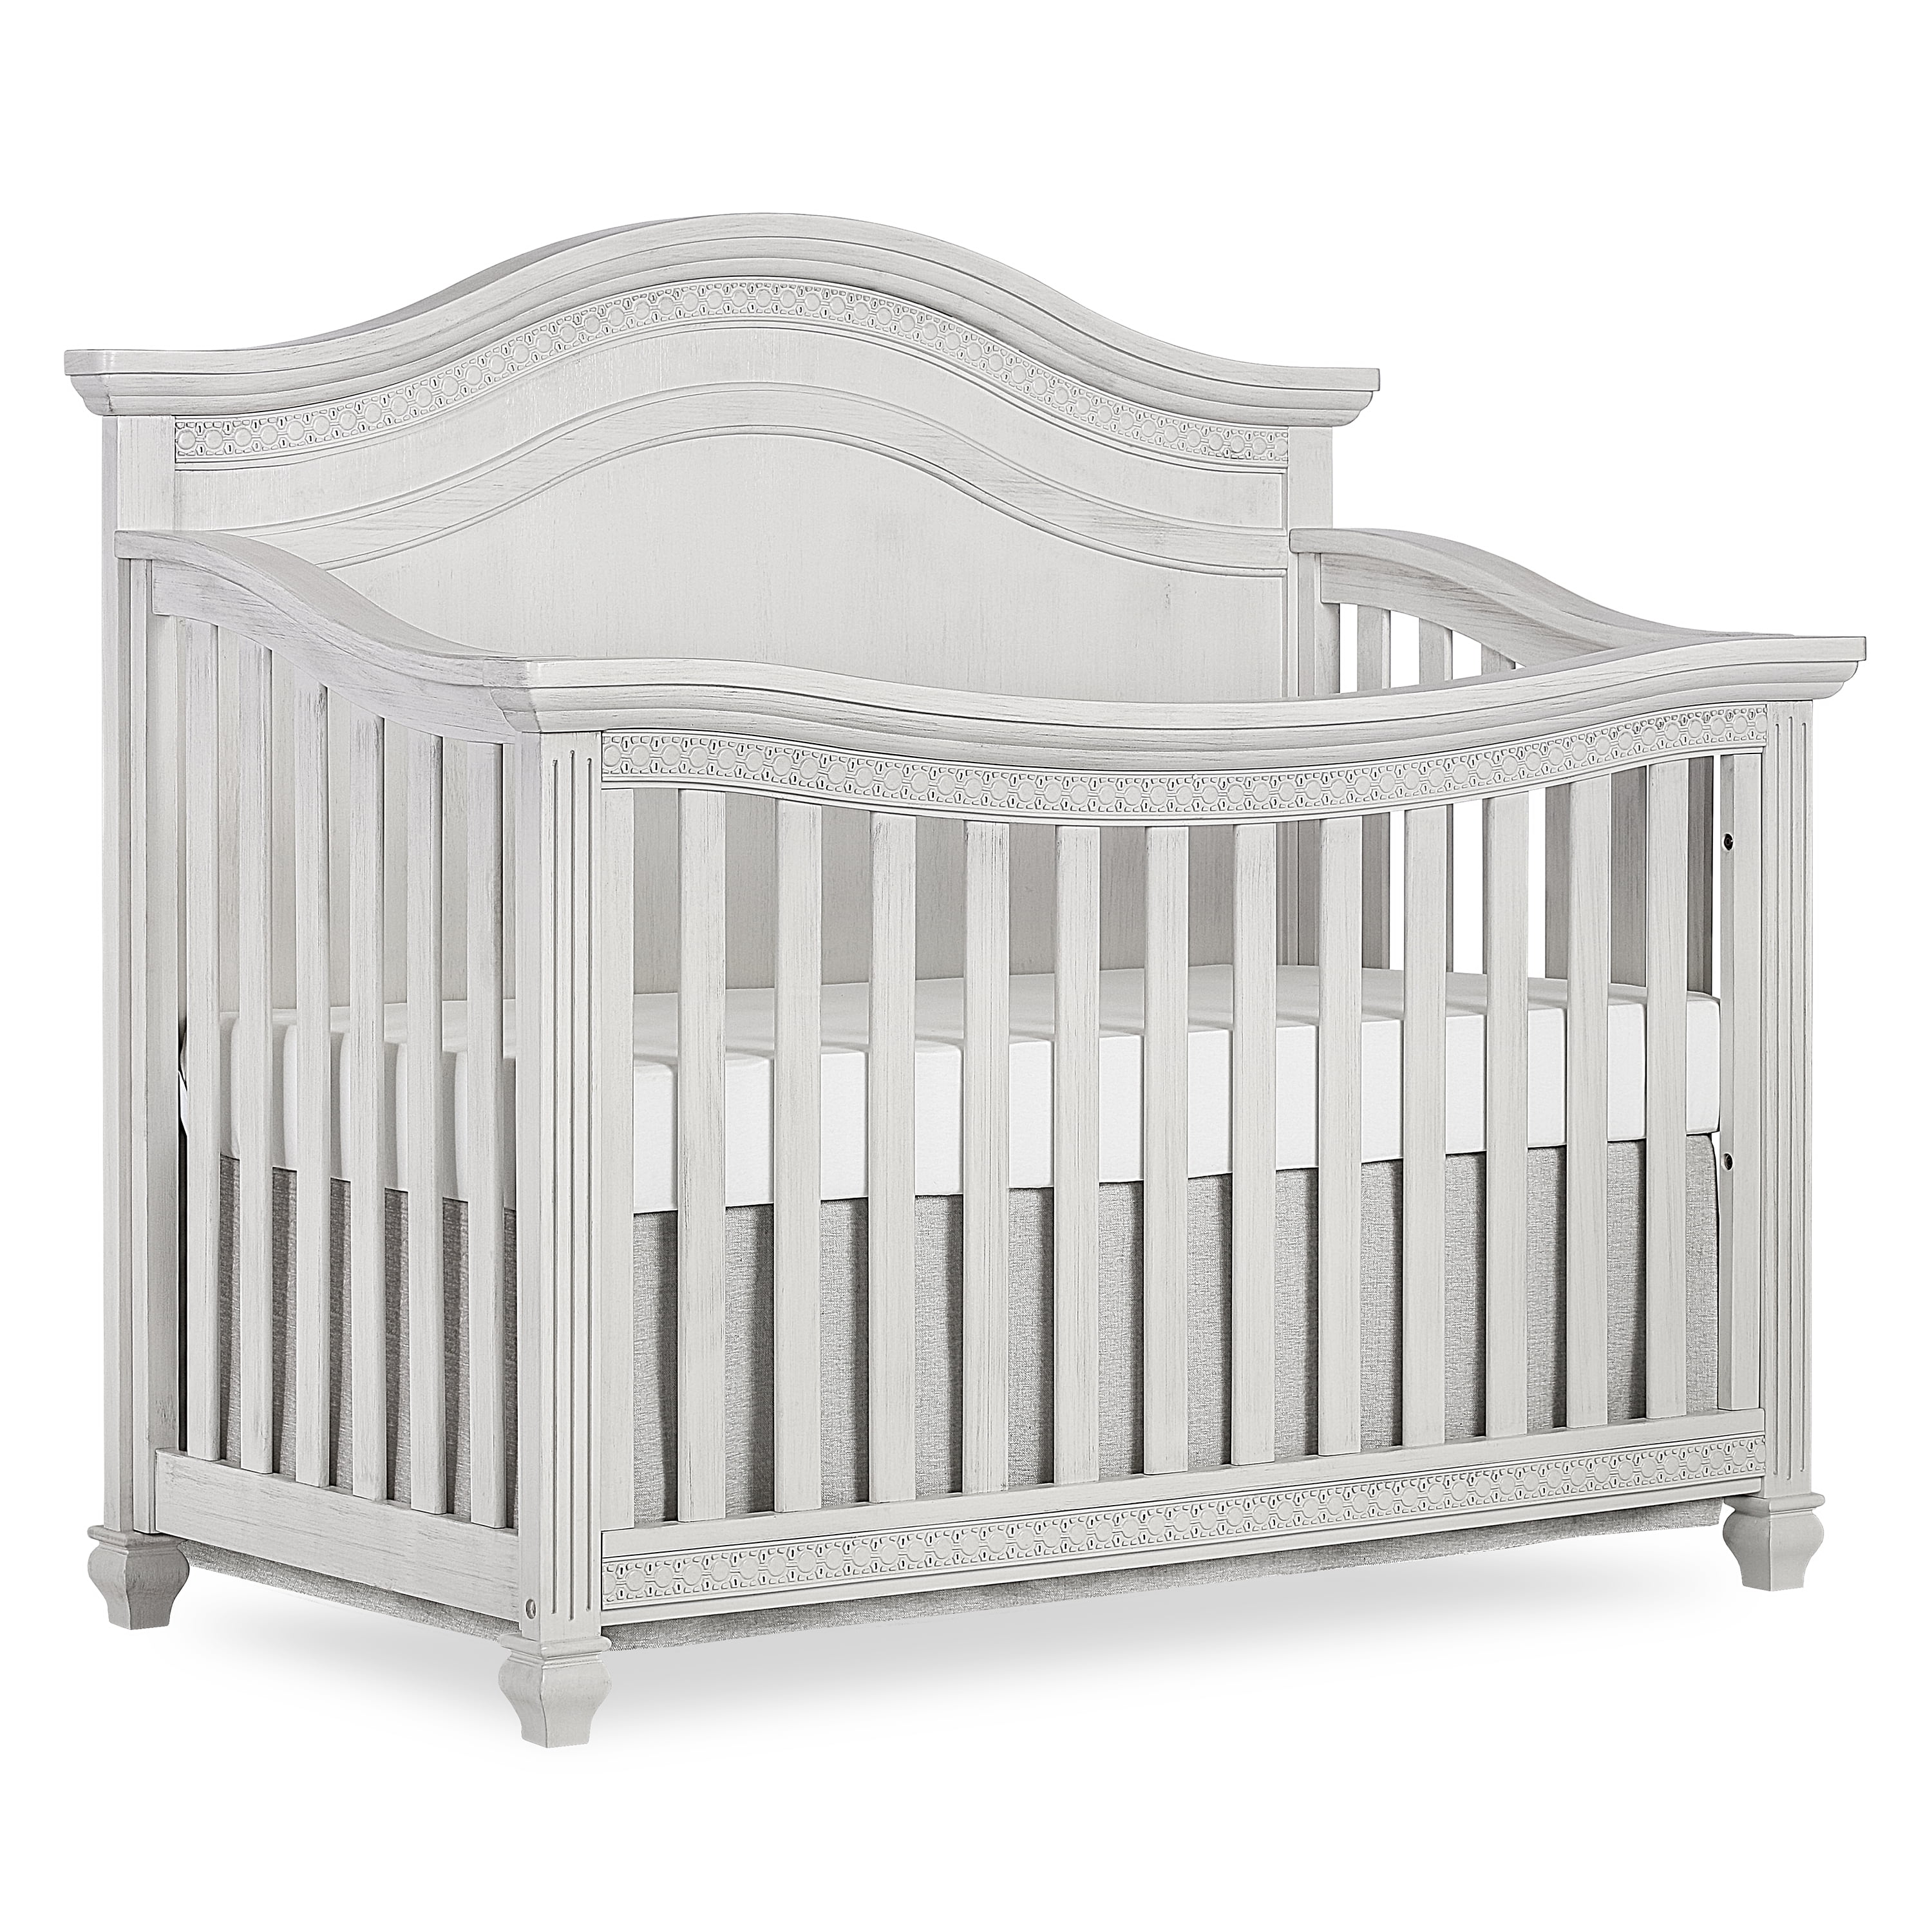 Antique Grey Mist Evolur Madison 5 in 1 Curved Top Convertible Crib 